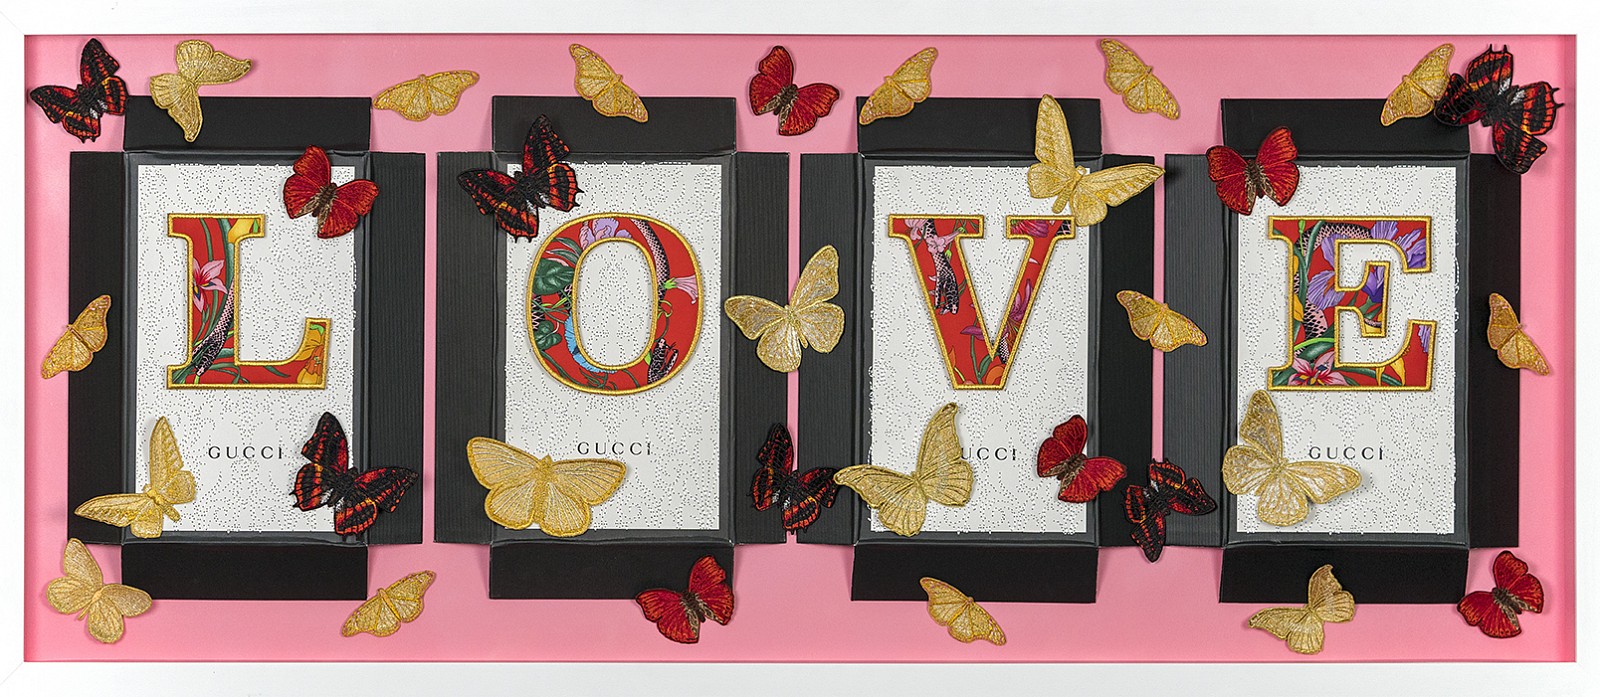 Stephen Wilson, Gucci LOVE is Blossoming
2018, Mixed Media